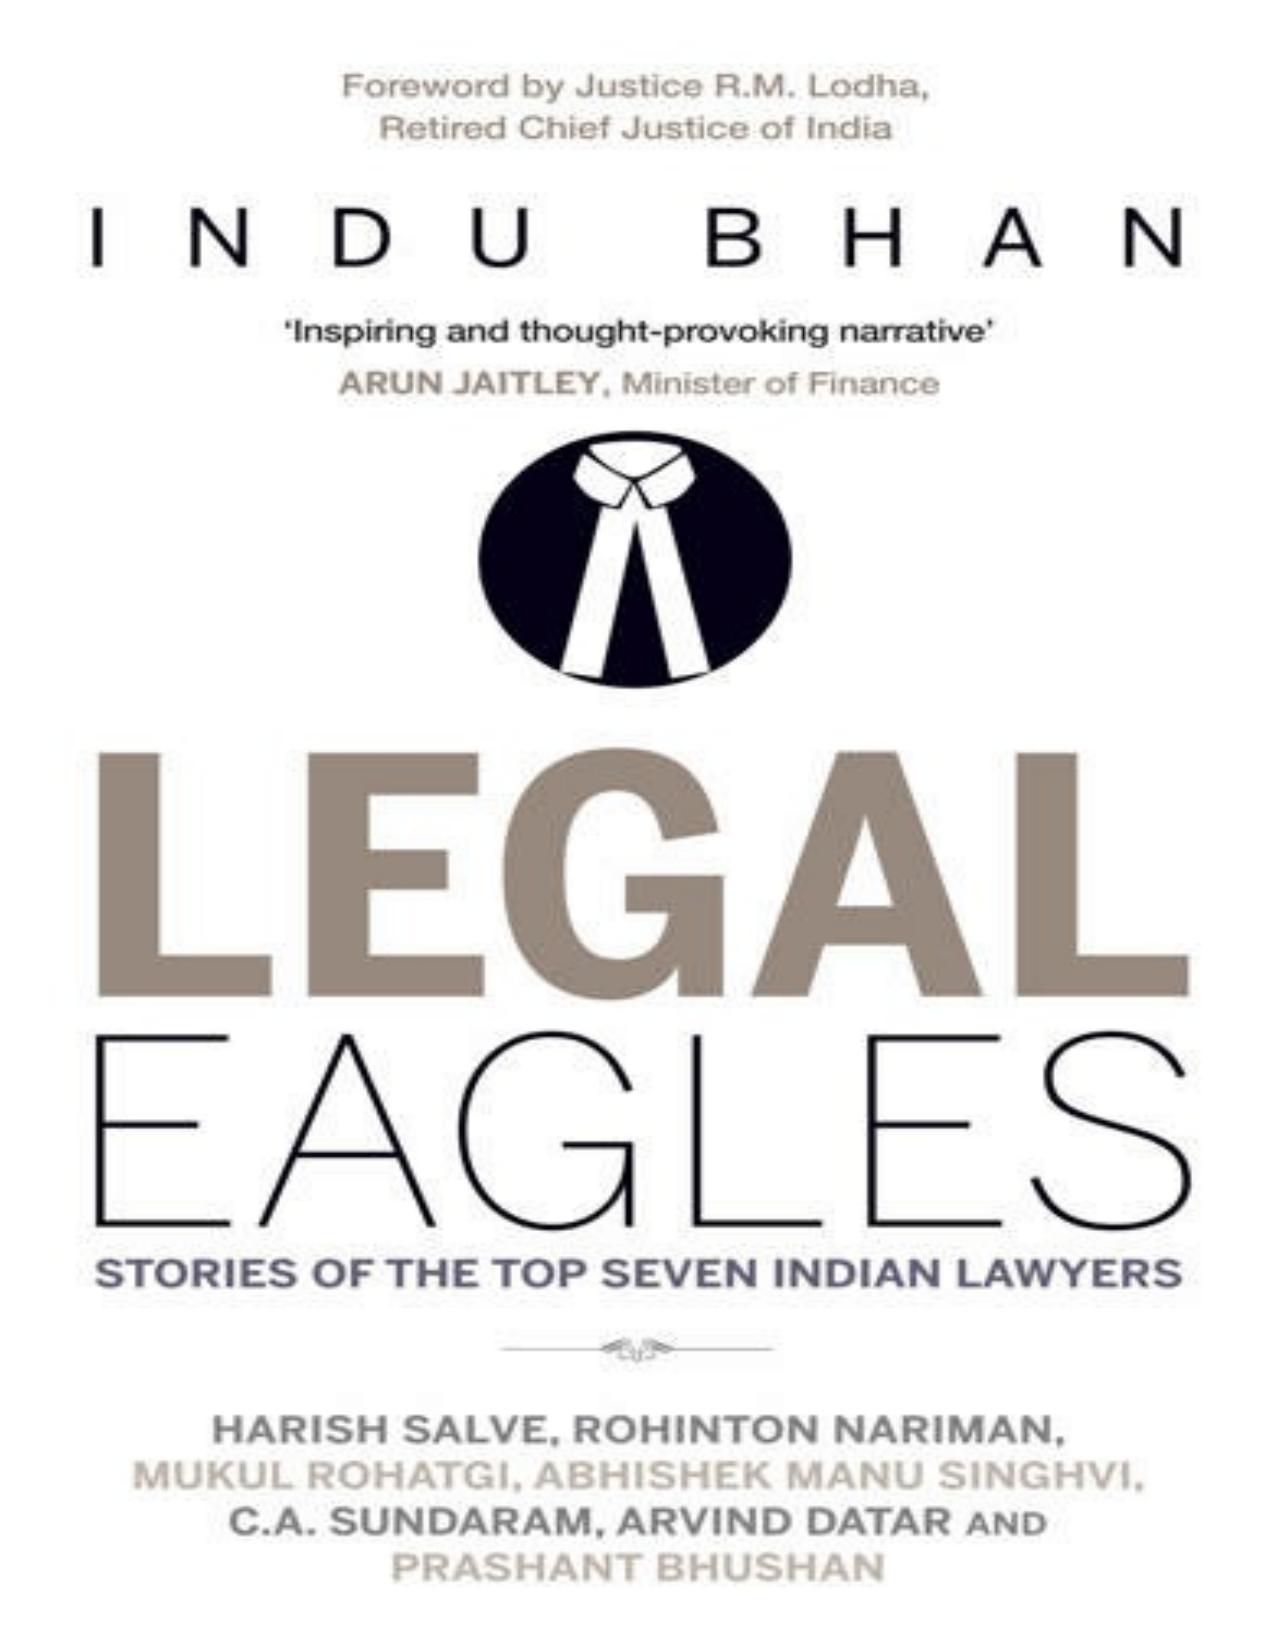 Legal Eagles: Stories of the Top Seven Indian Lawyers by Indu Bhan